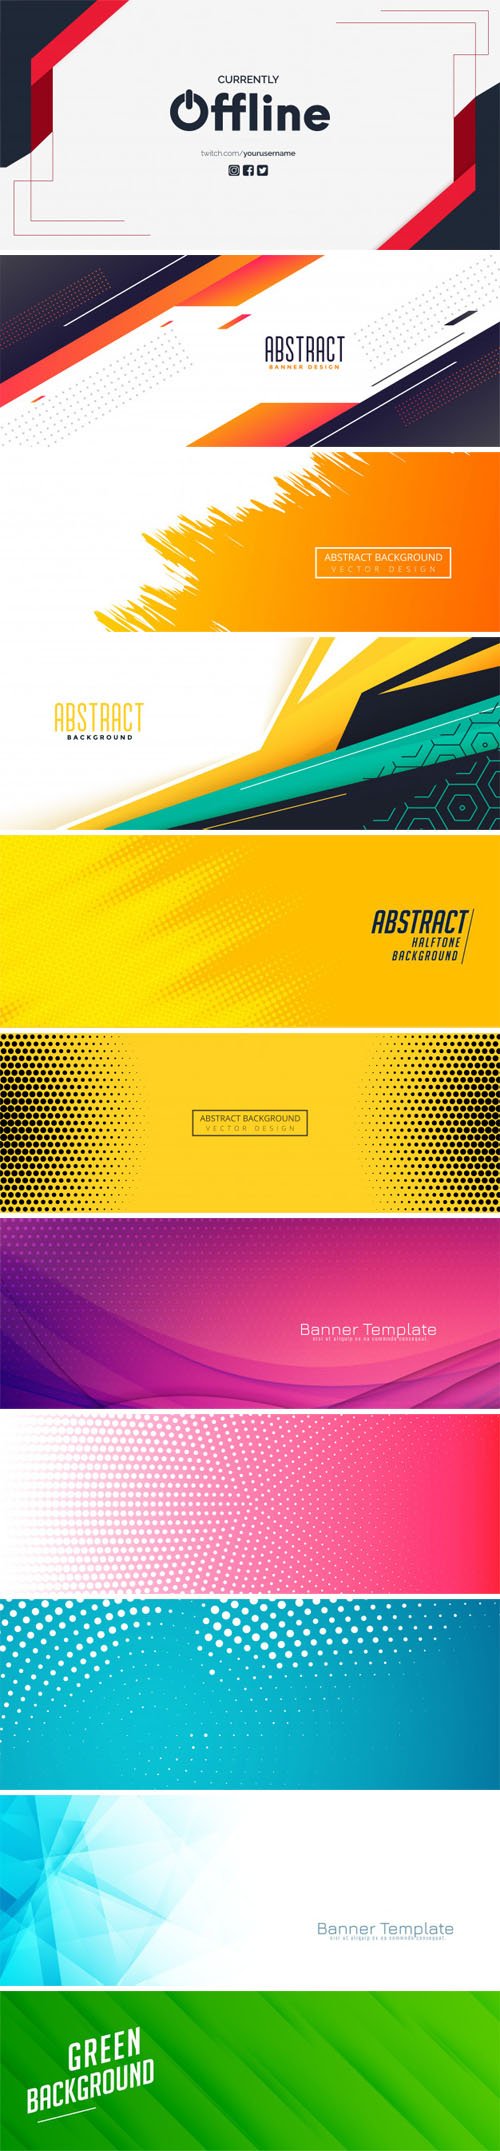 11 Abstract Banners Vector Templates